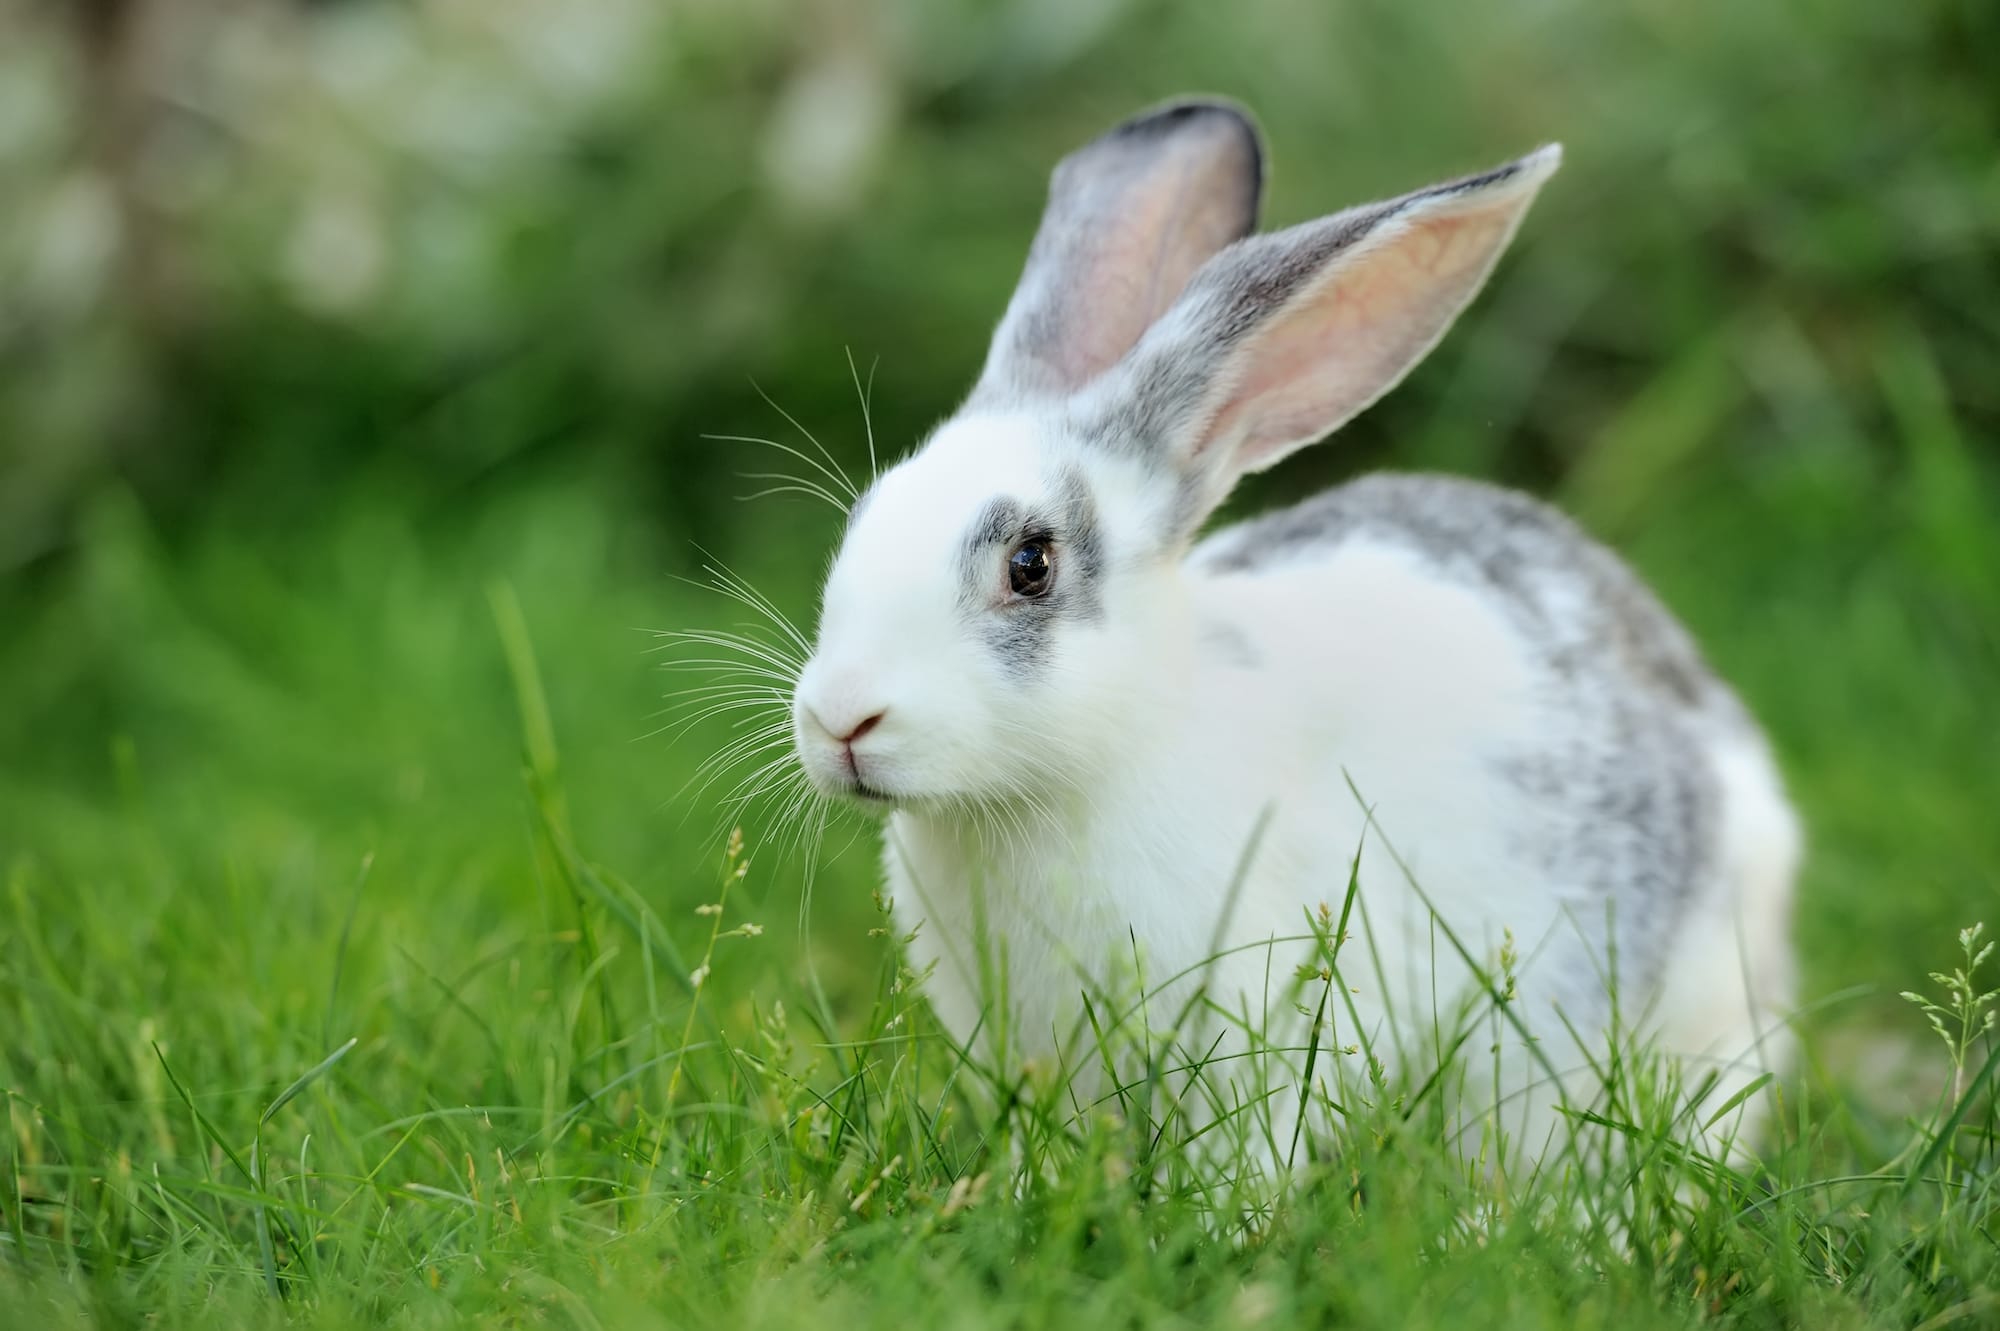 Image shows white rabbit outdoors.